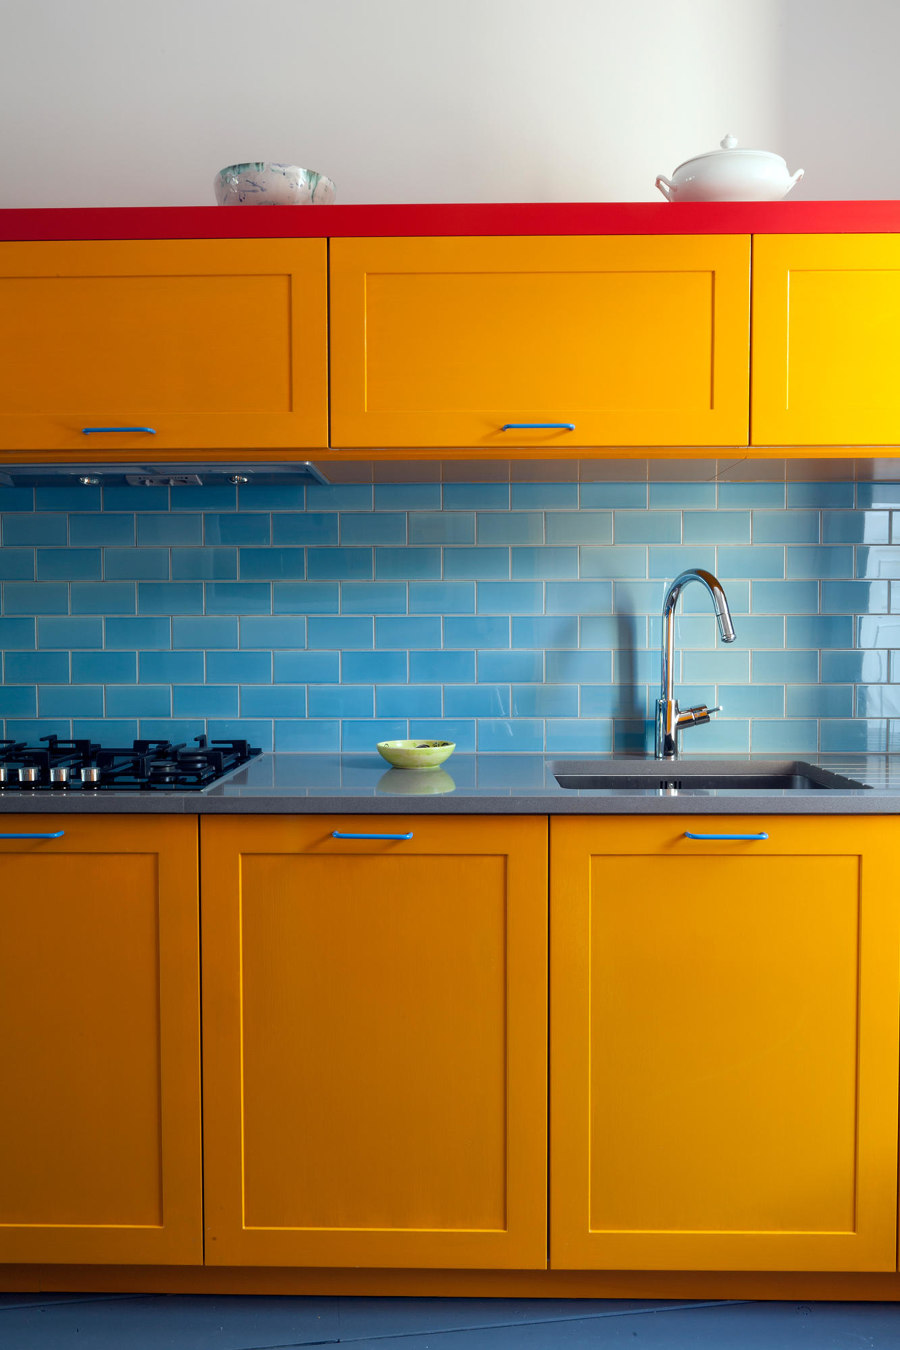 Eight creative material options for a kitchen backsplash | Novedades